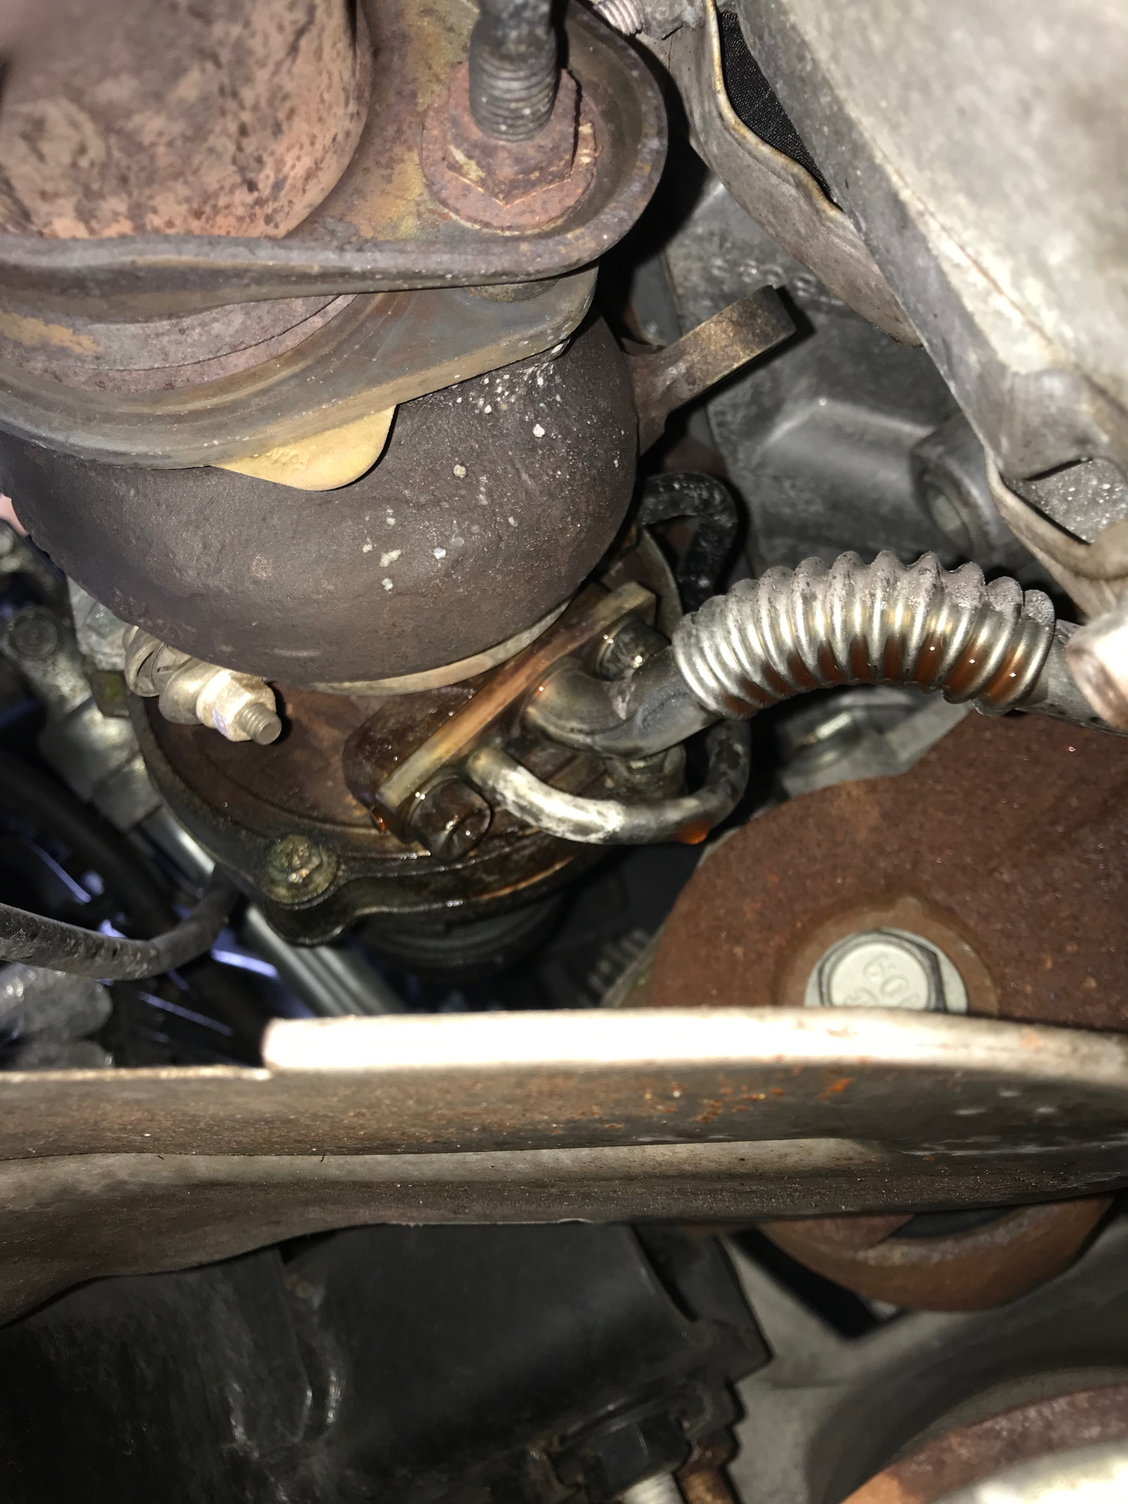 any fixes for 5.4 liter ford crossover leak